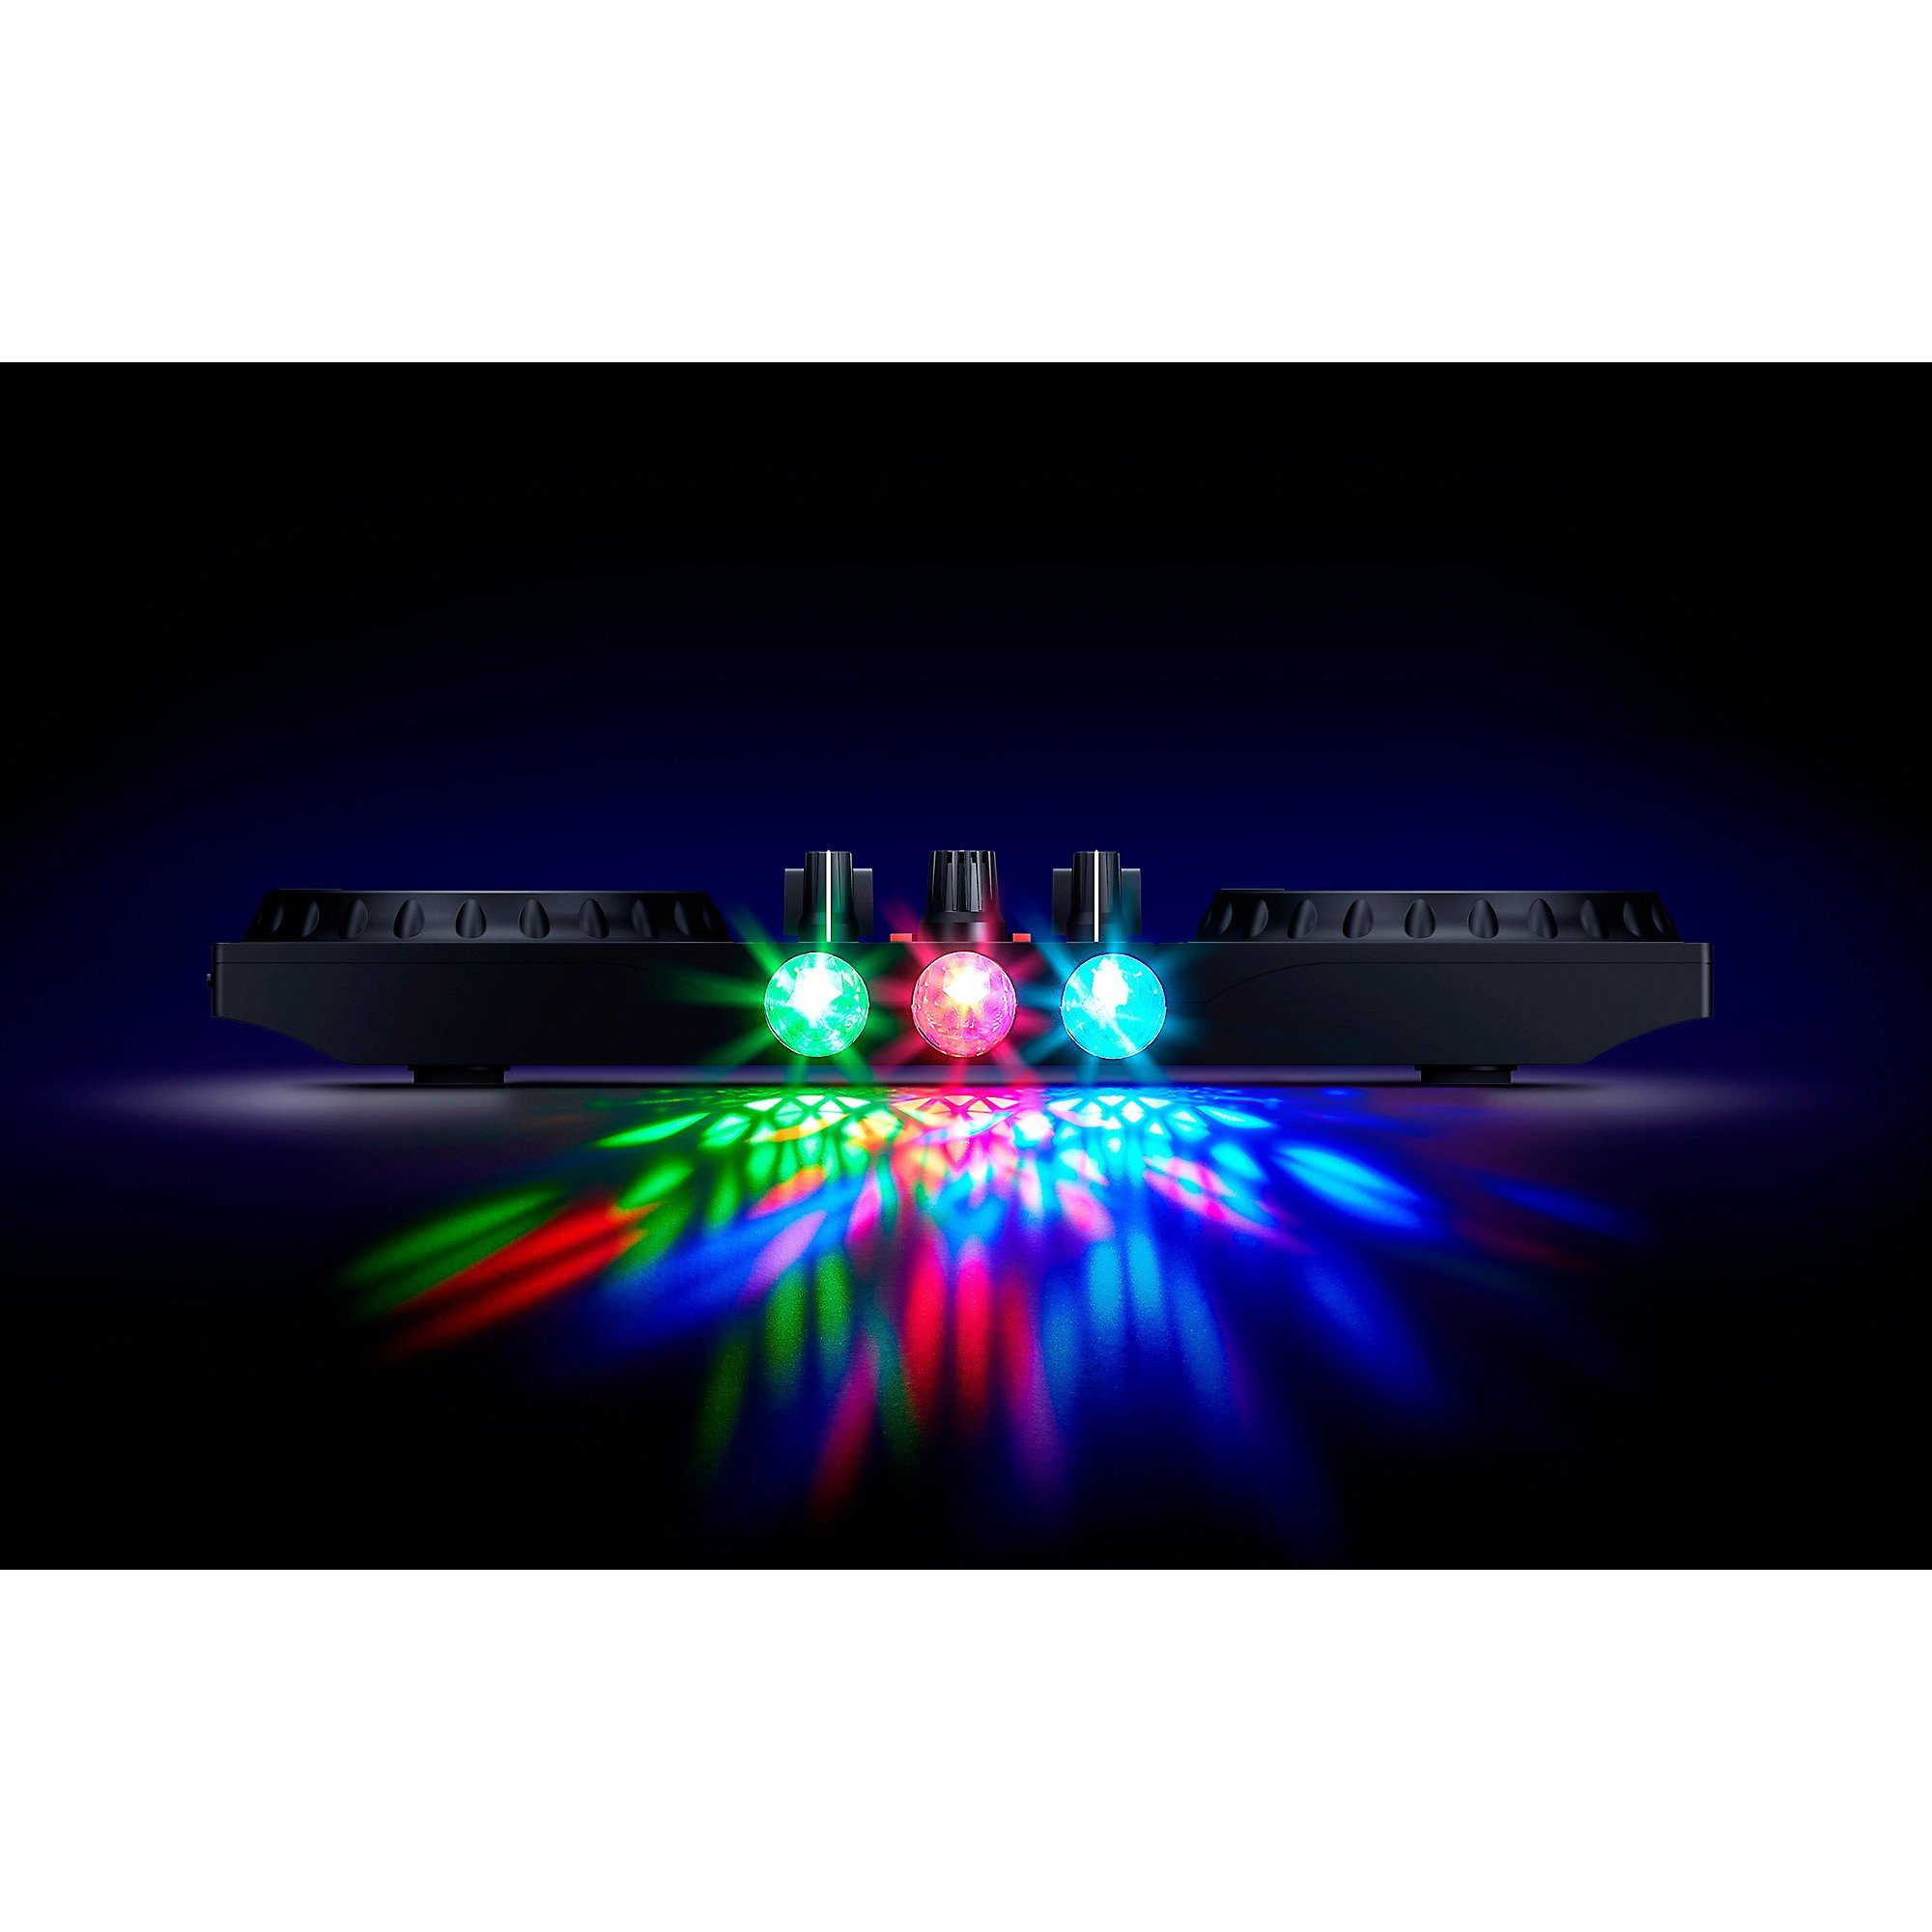 Numark Beginners Party Mix II - DJ Controller Set with Built-In Lights, Mixer for Serato Lite and Algoriddim Pro AI - image 5 of 8